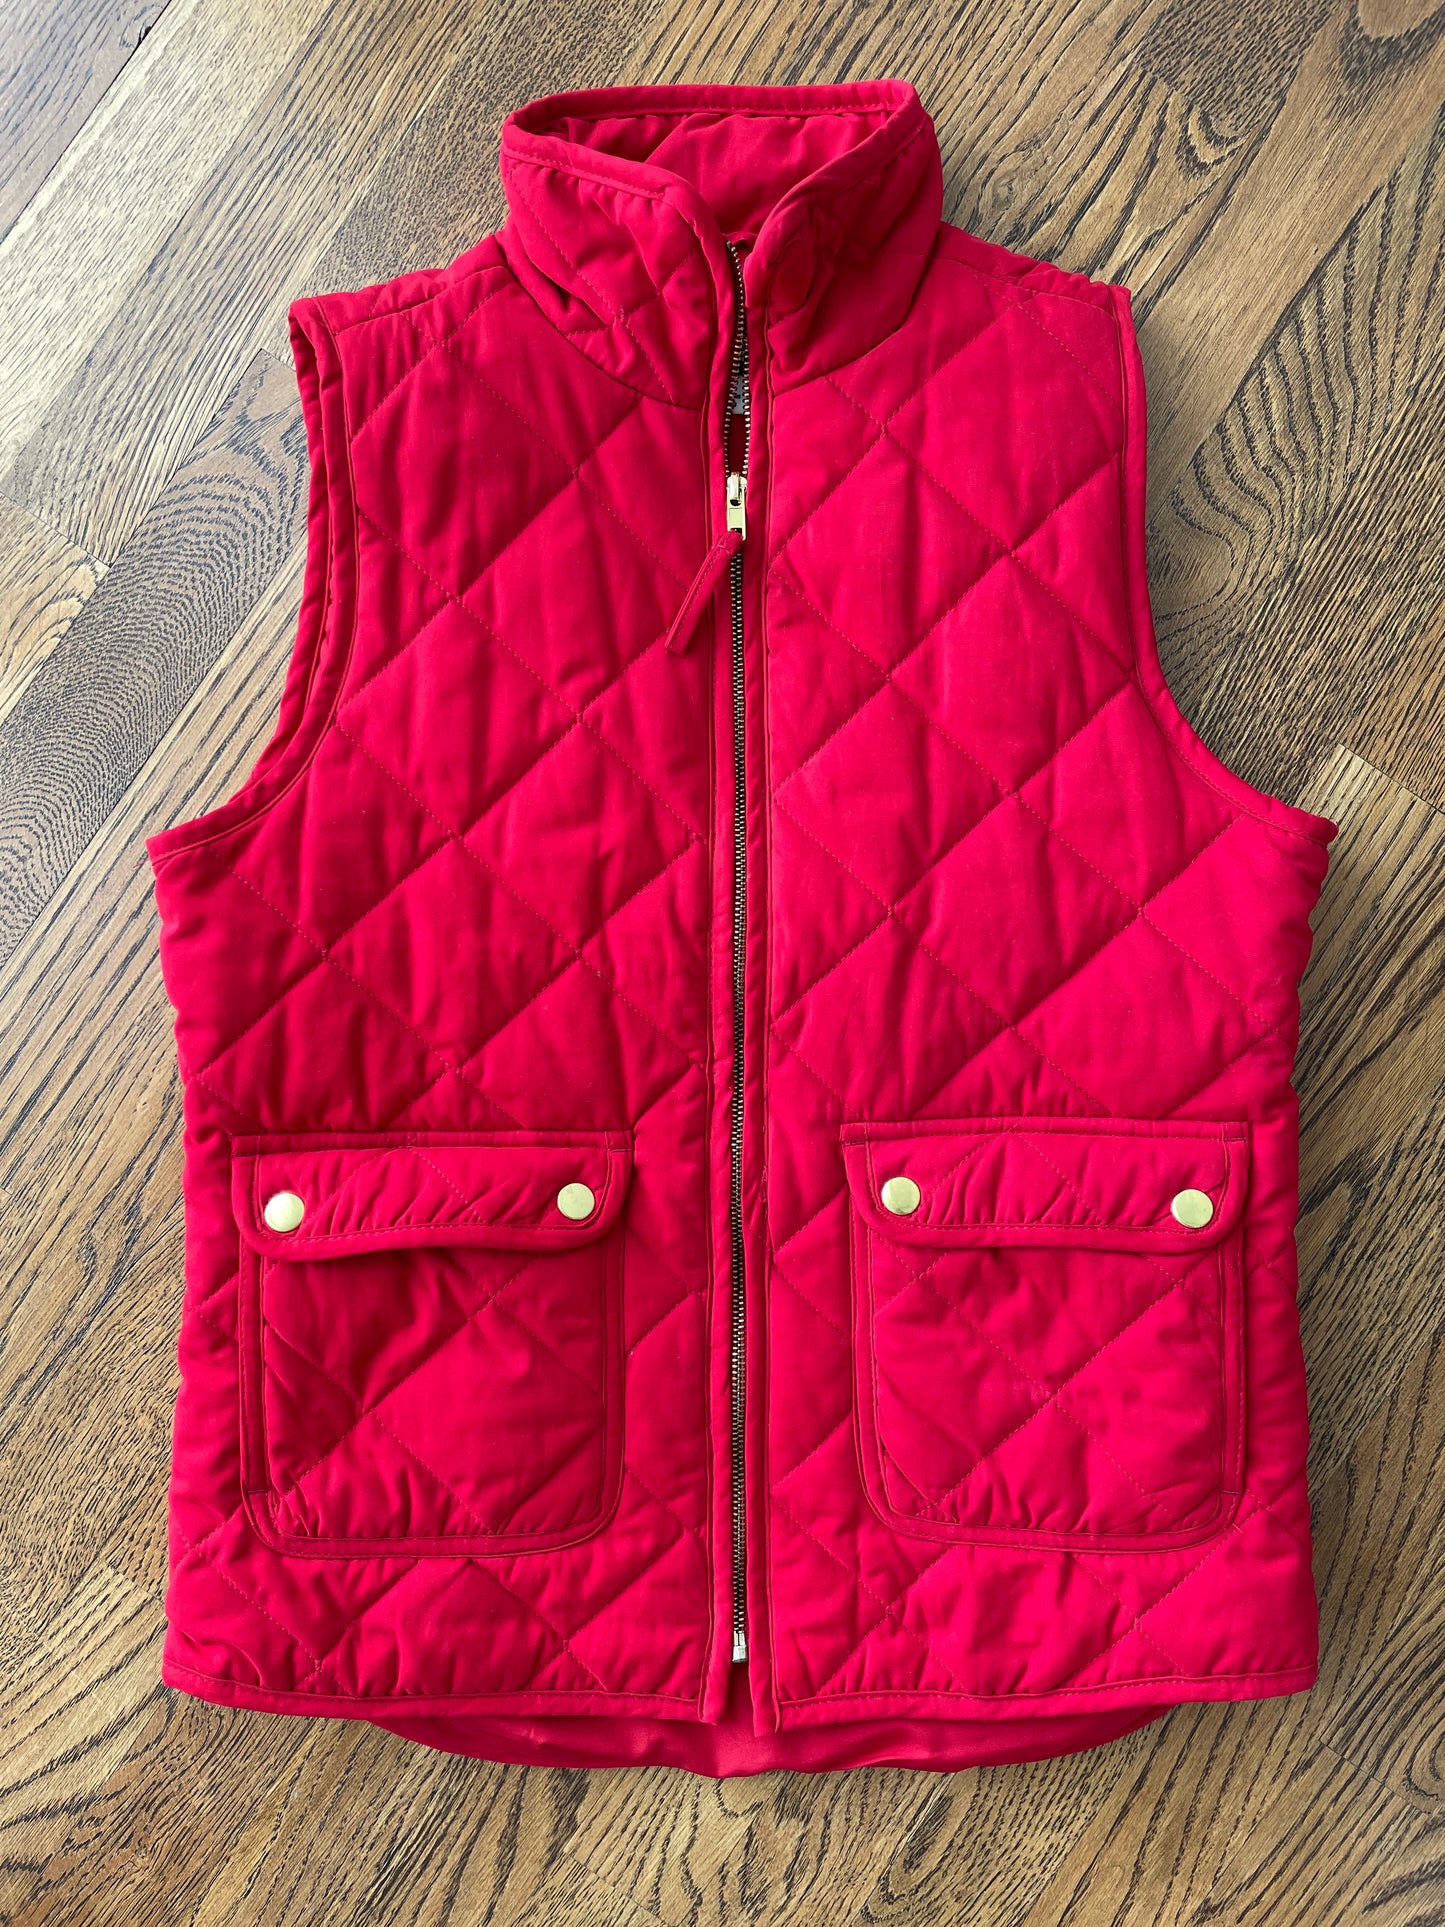 Women's S, Blue Rain, Red Quilted Vest